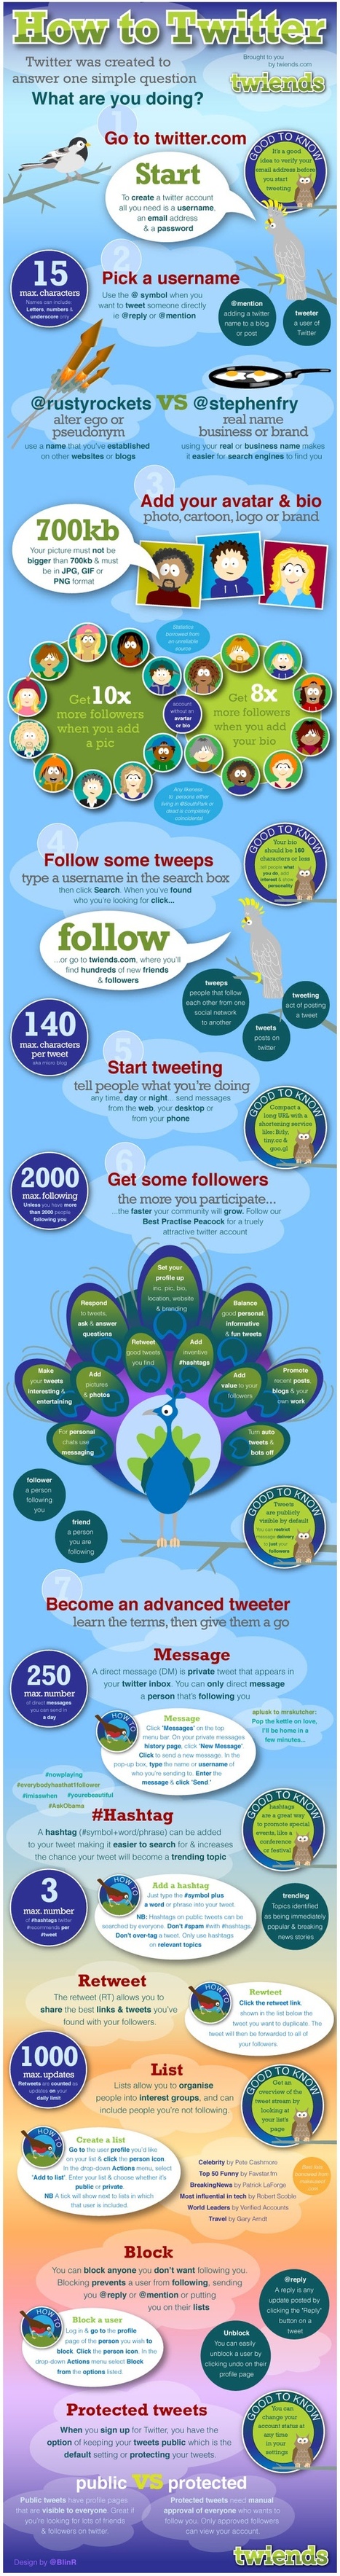 How to Twitter in 60 Seconds [Infographic] | 21st Century Learning and Teaching | Scoop.it